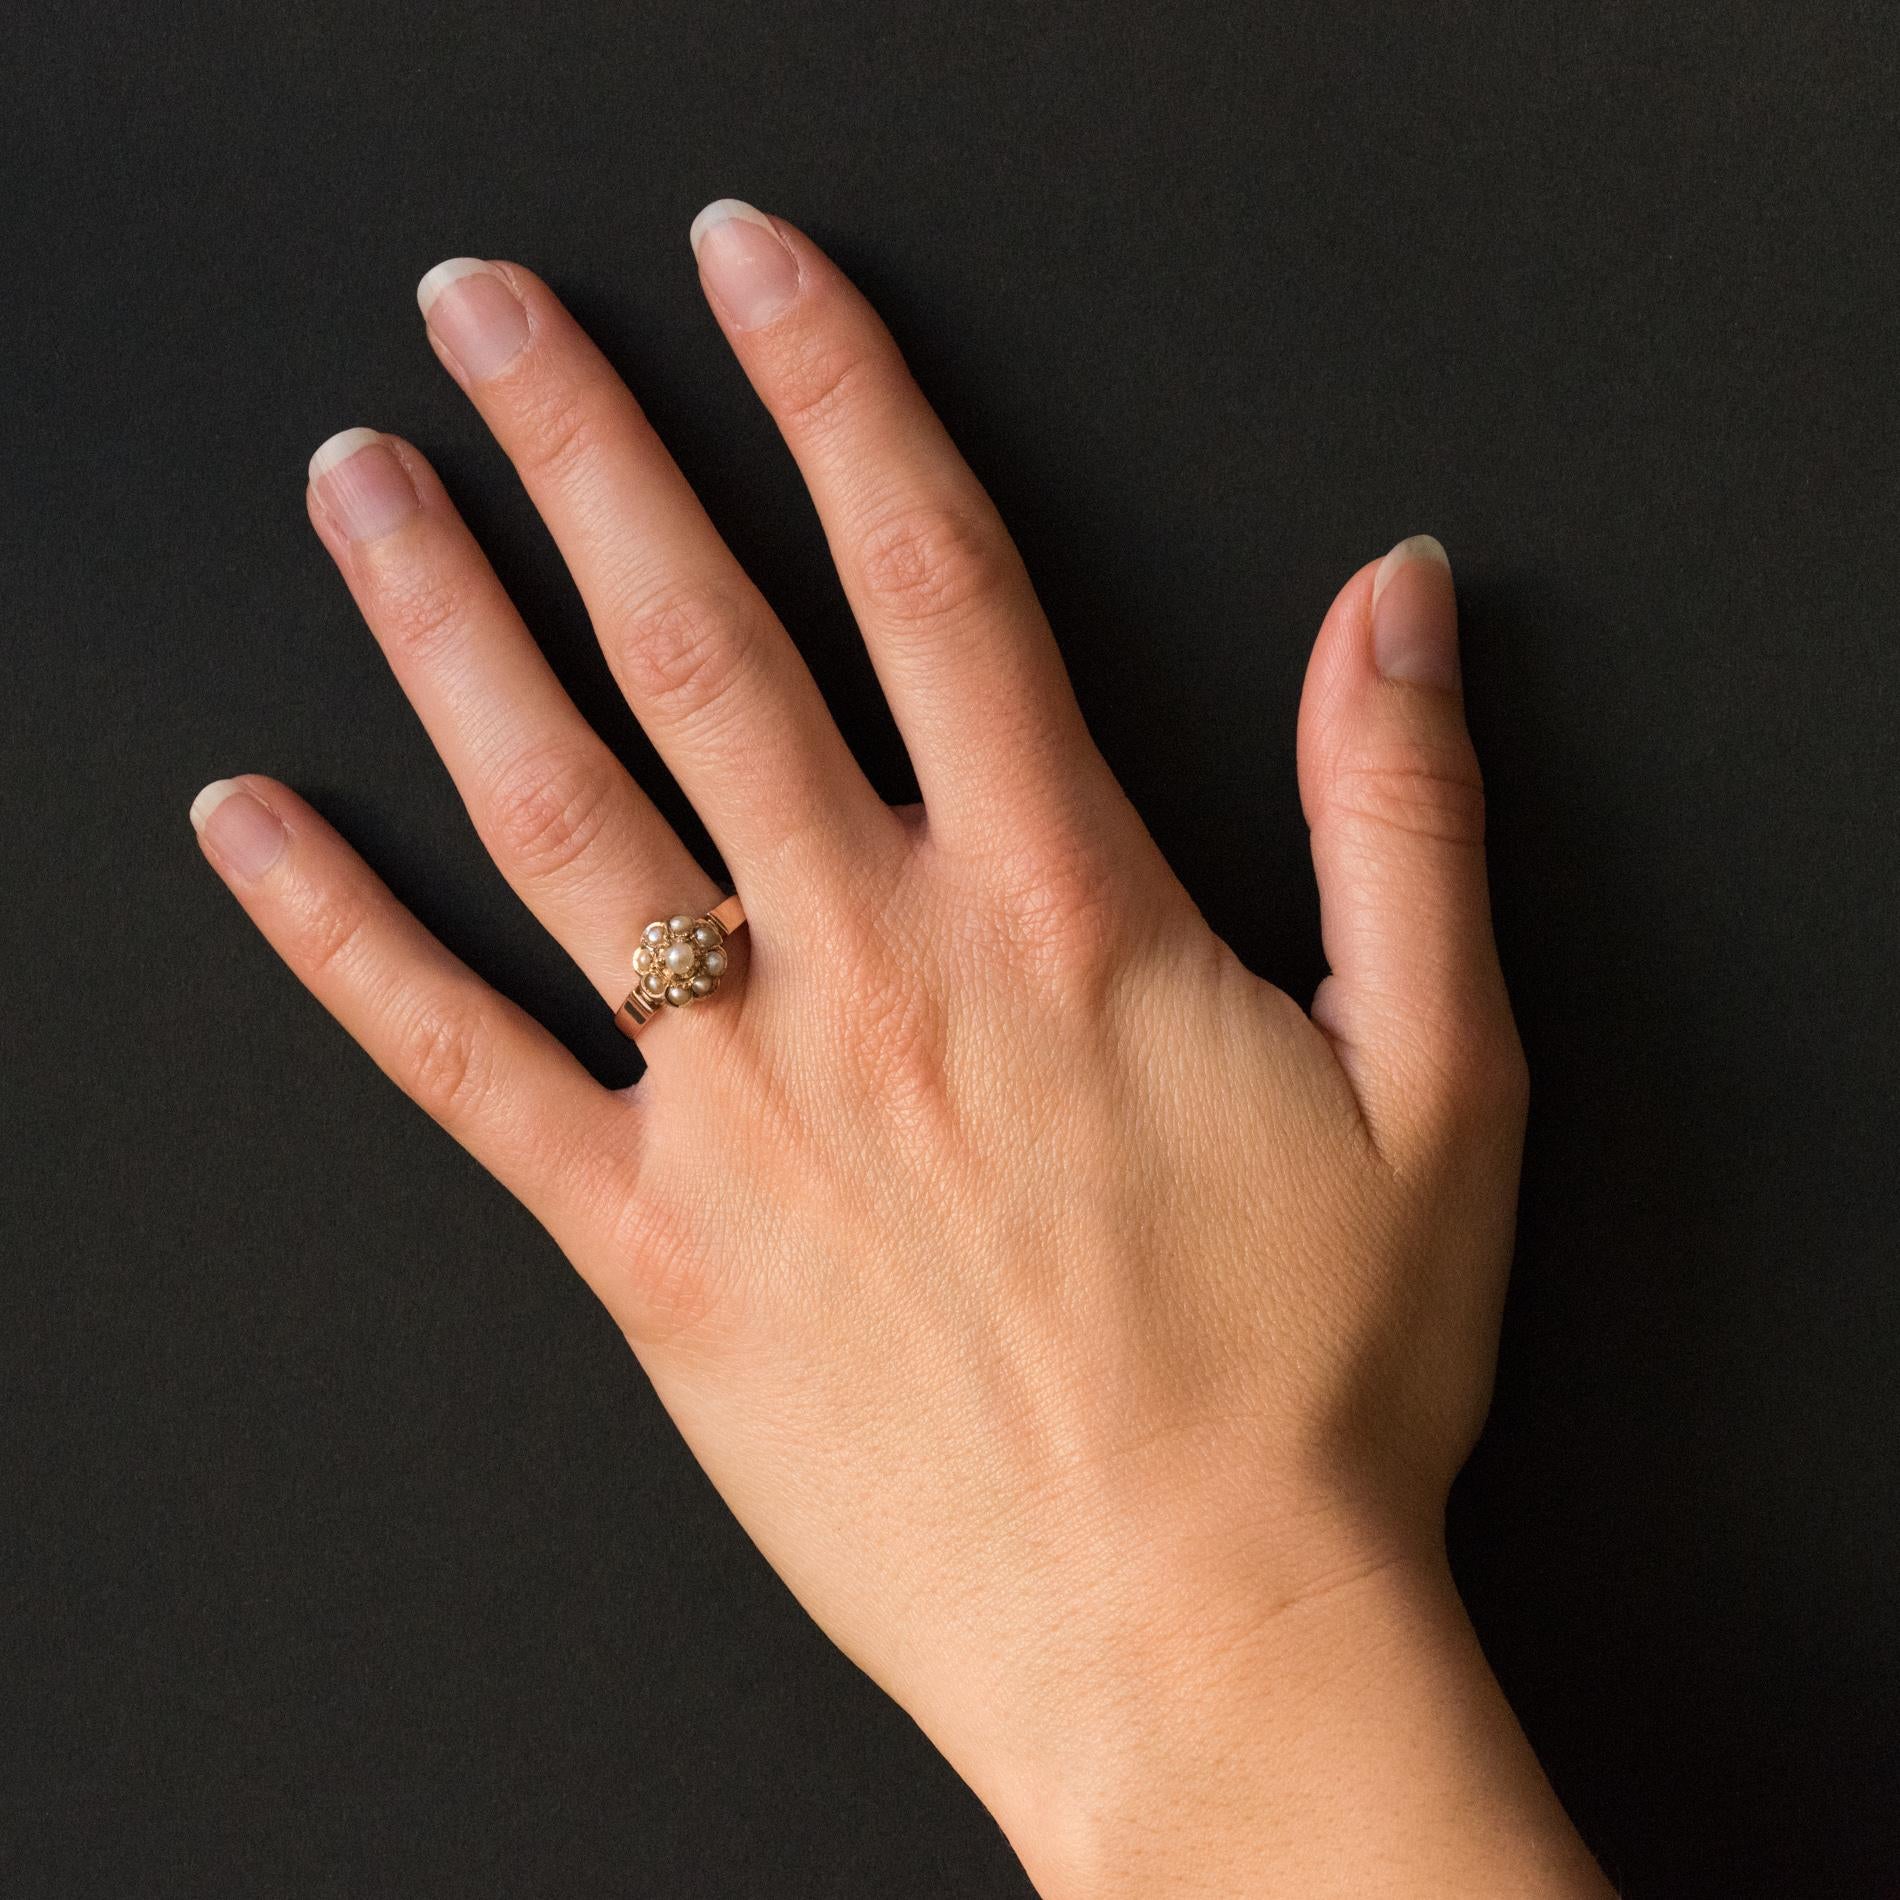 Ring in 18 karats rose gold, horse's head hallmark.
Lovely antique ring, it is set with claws of a half natural pearl in an entourage of 8 half natural pearls closed set.
Diameter of the pearls: 2 / 2.5 mm for the entourage 3,5 / 4 mm for the one in